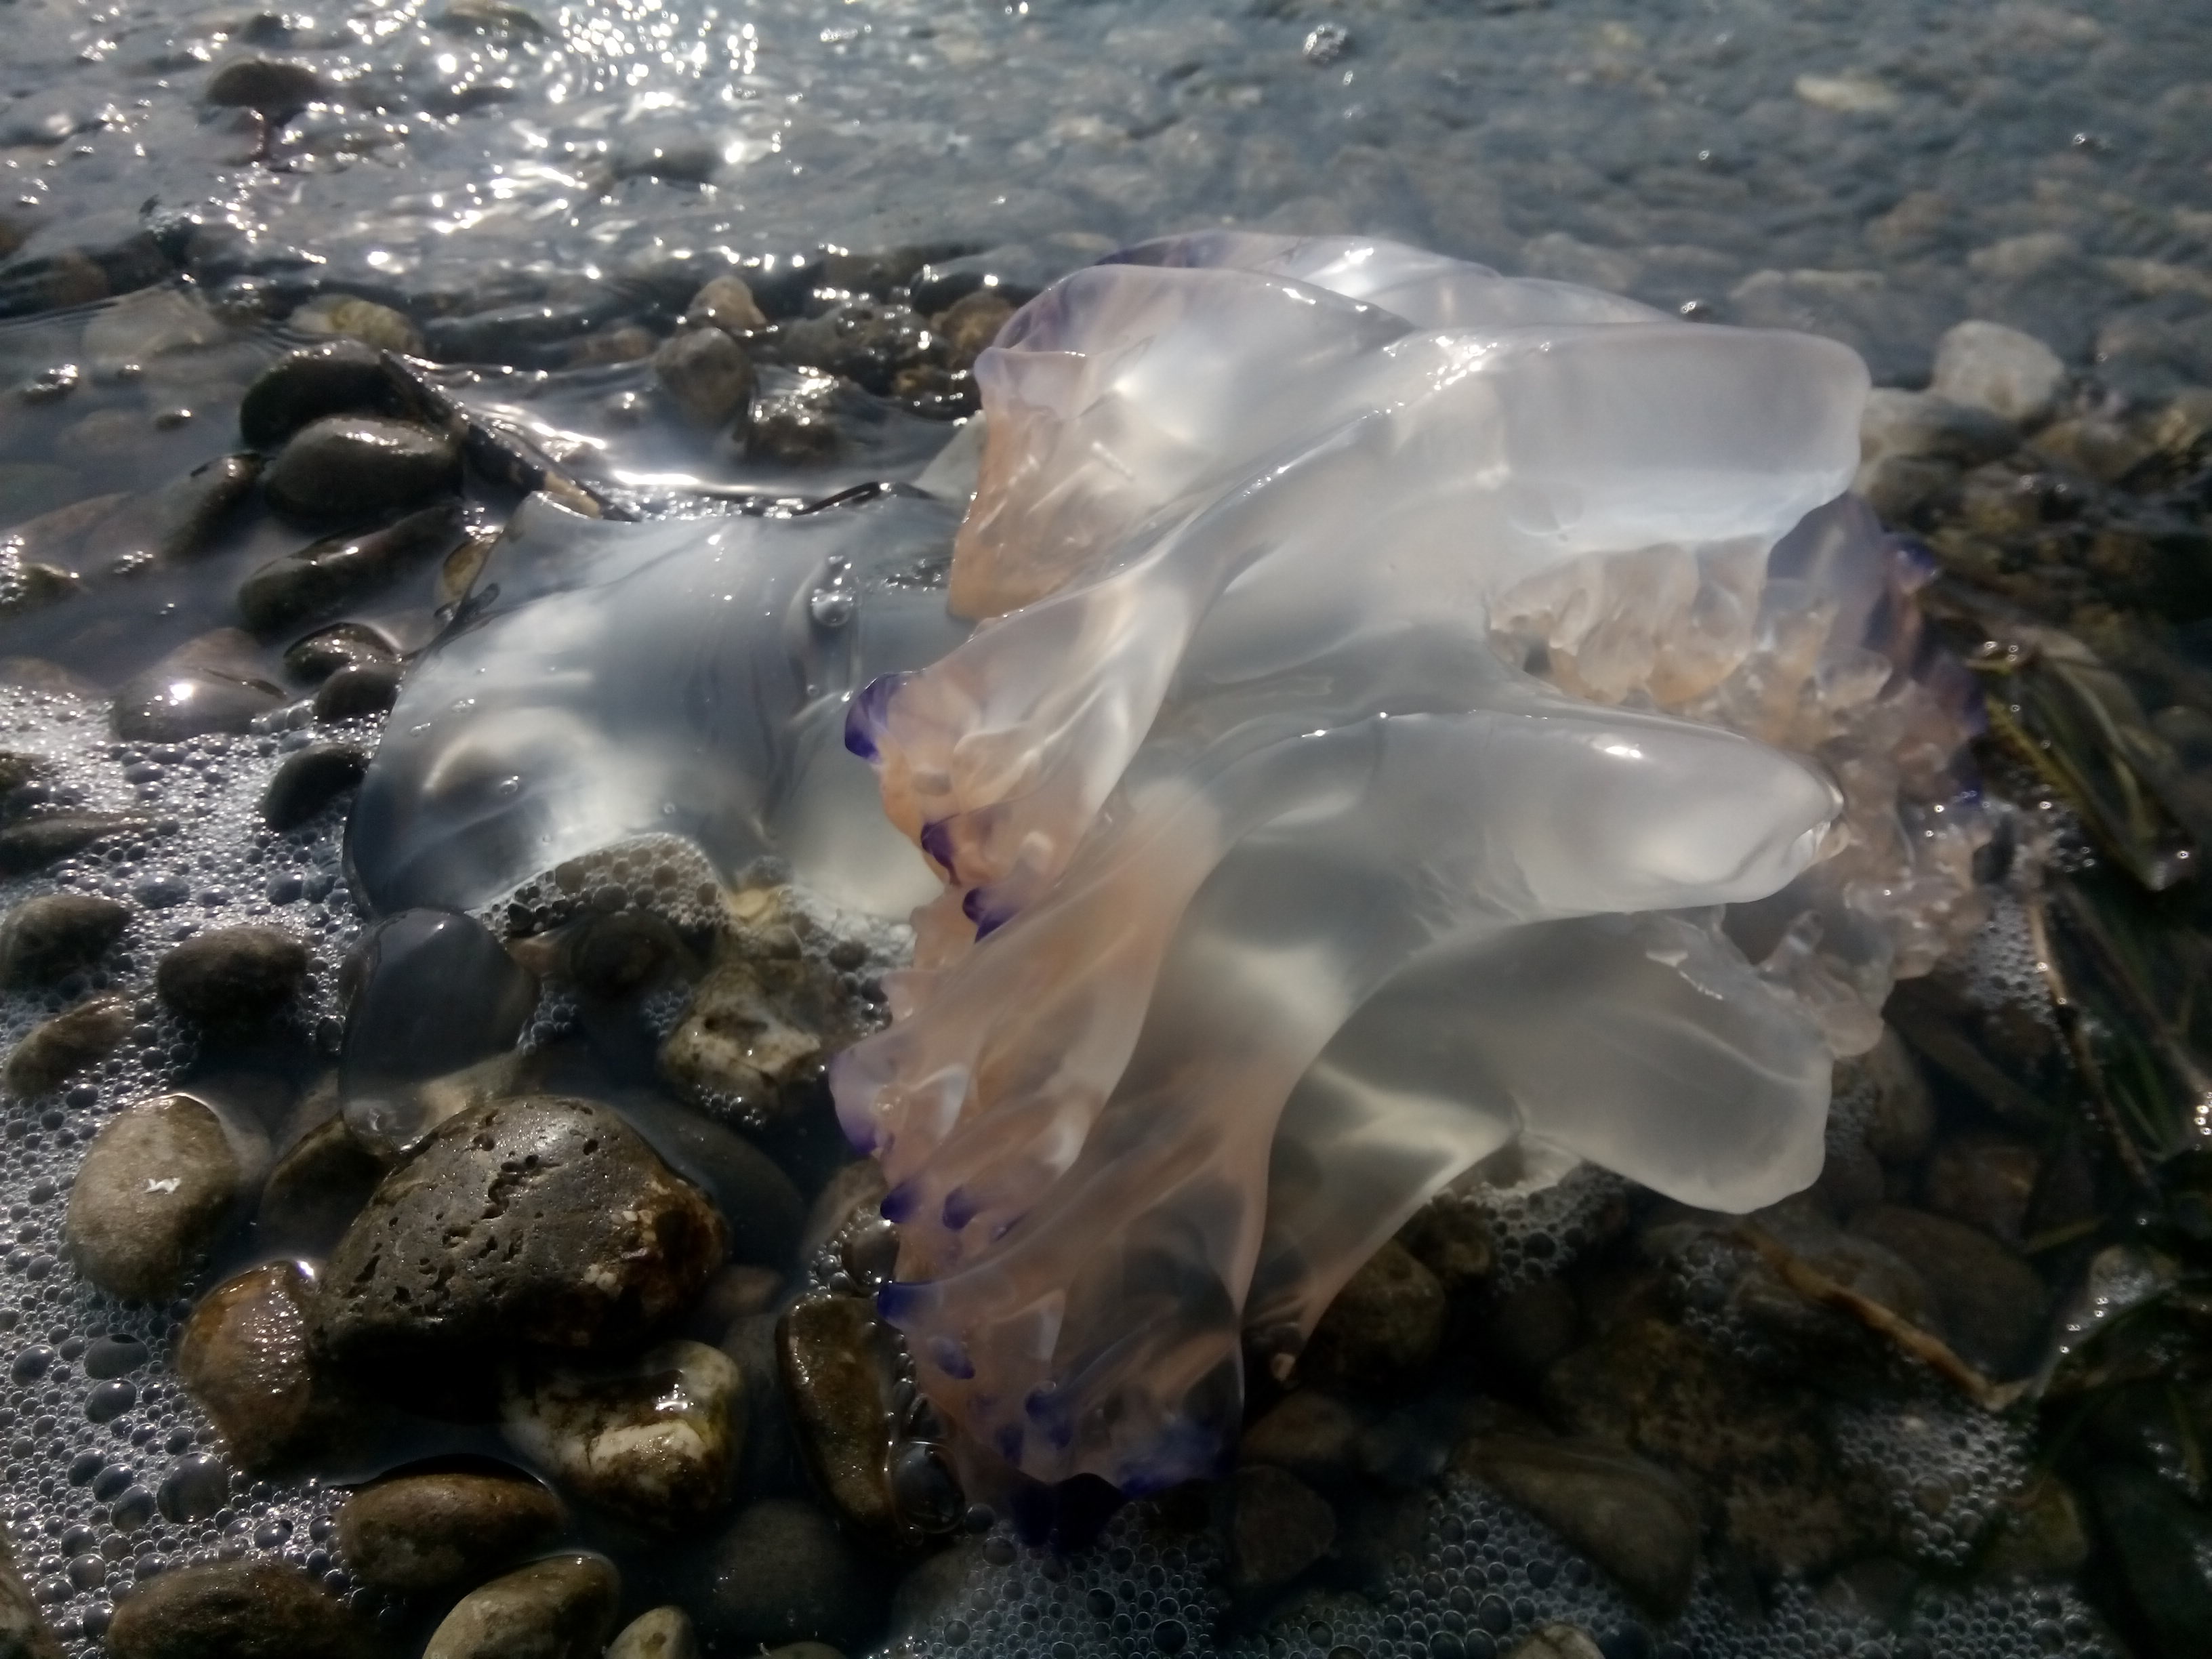 A washed up white and purple blob, it is a jellyfish